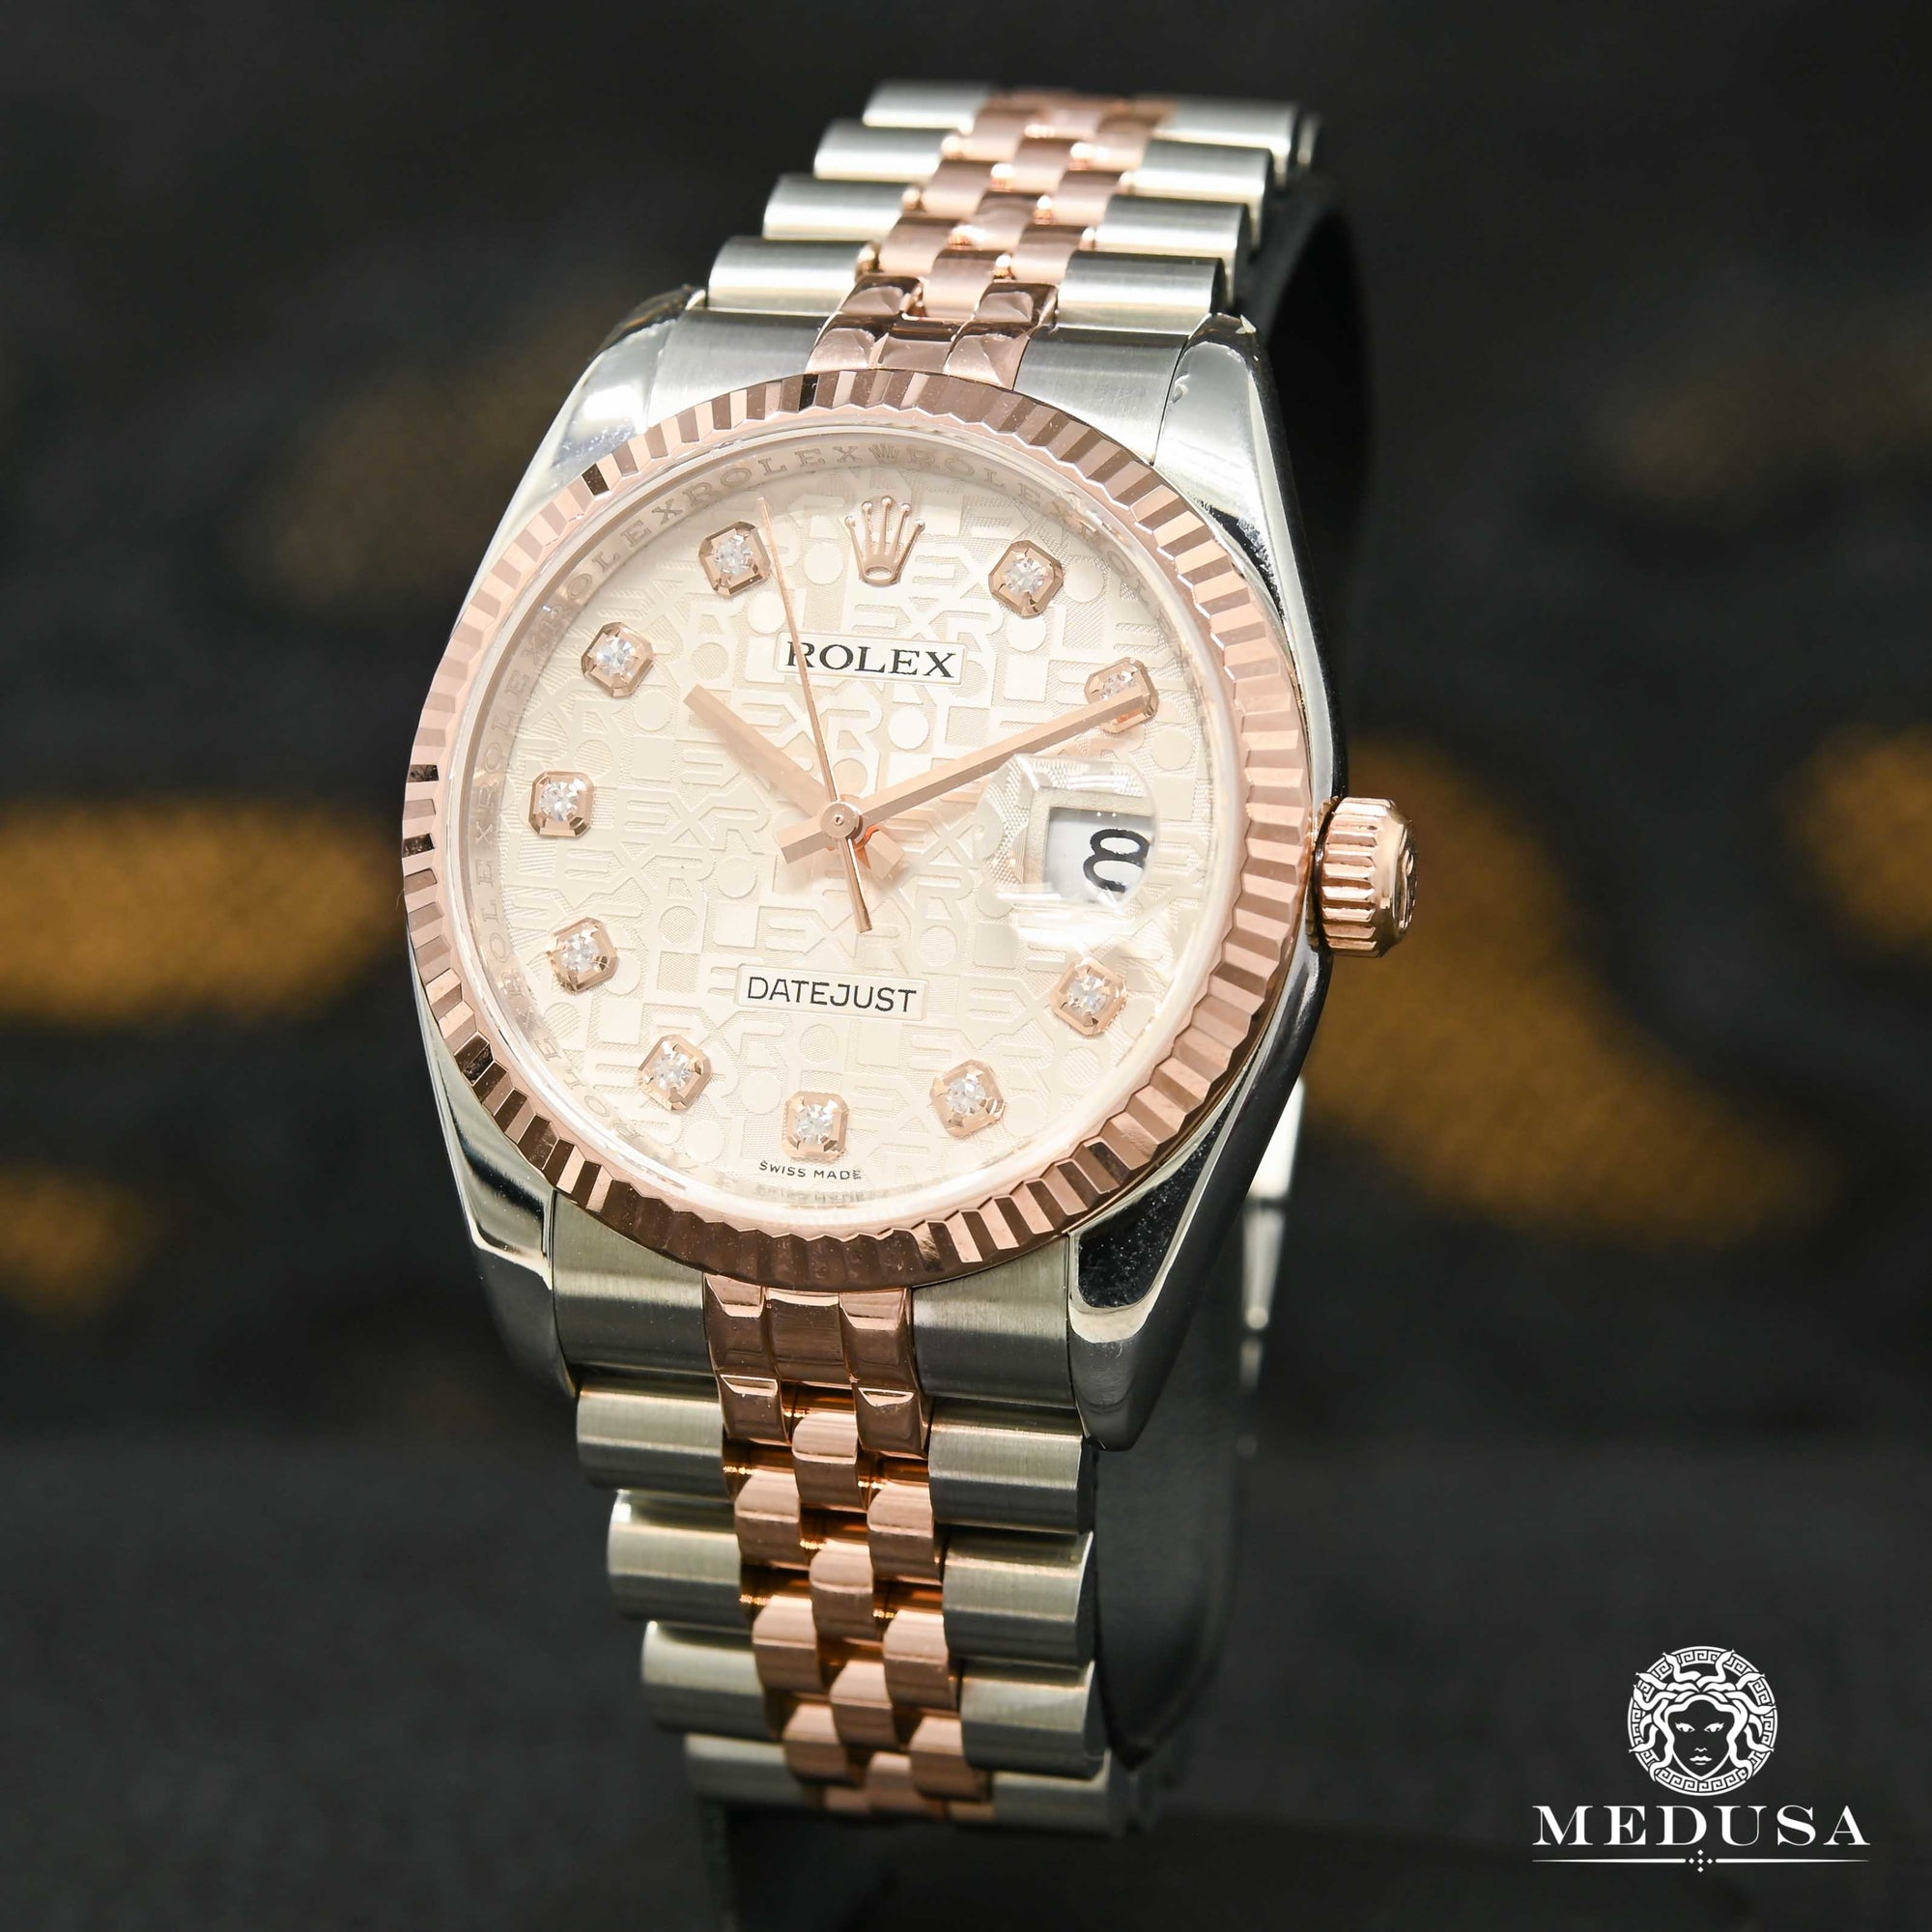 Montre Rolex | Montre Homme Rolex Datejust 36mm - 116231 Everose Anniversary Dial White Or Rose 2 Tons